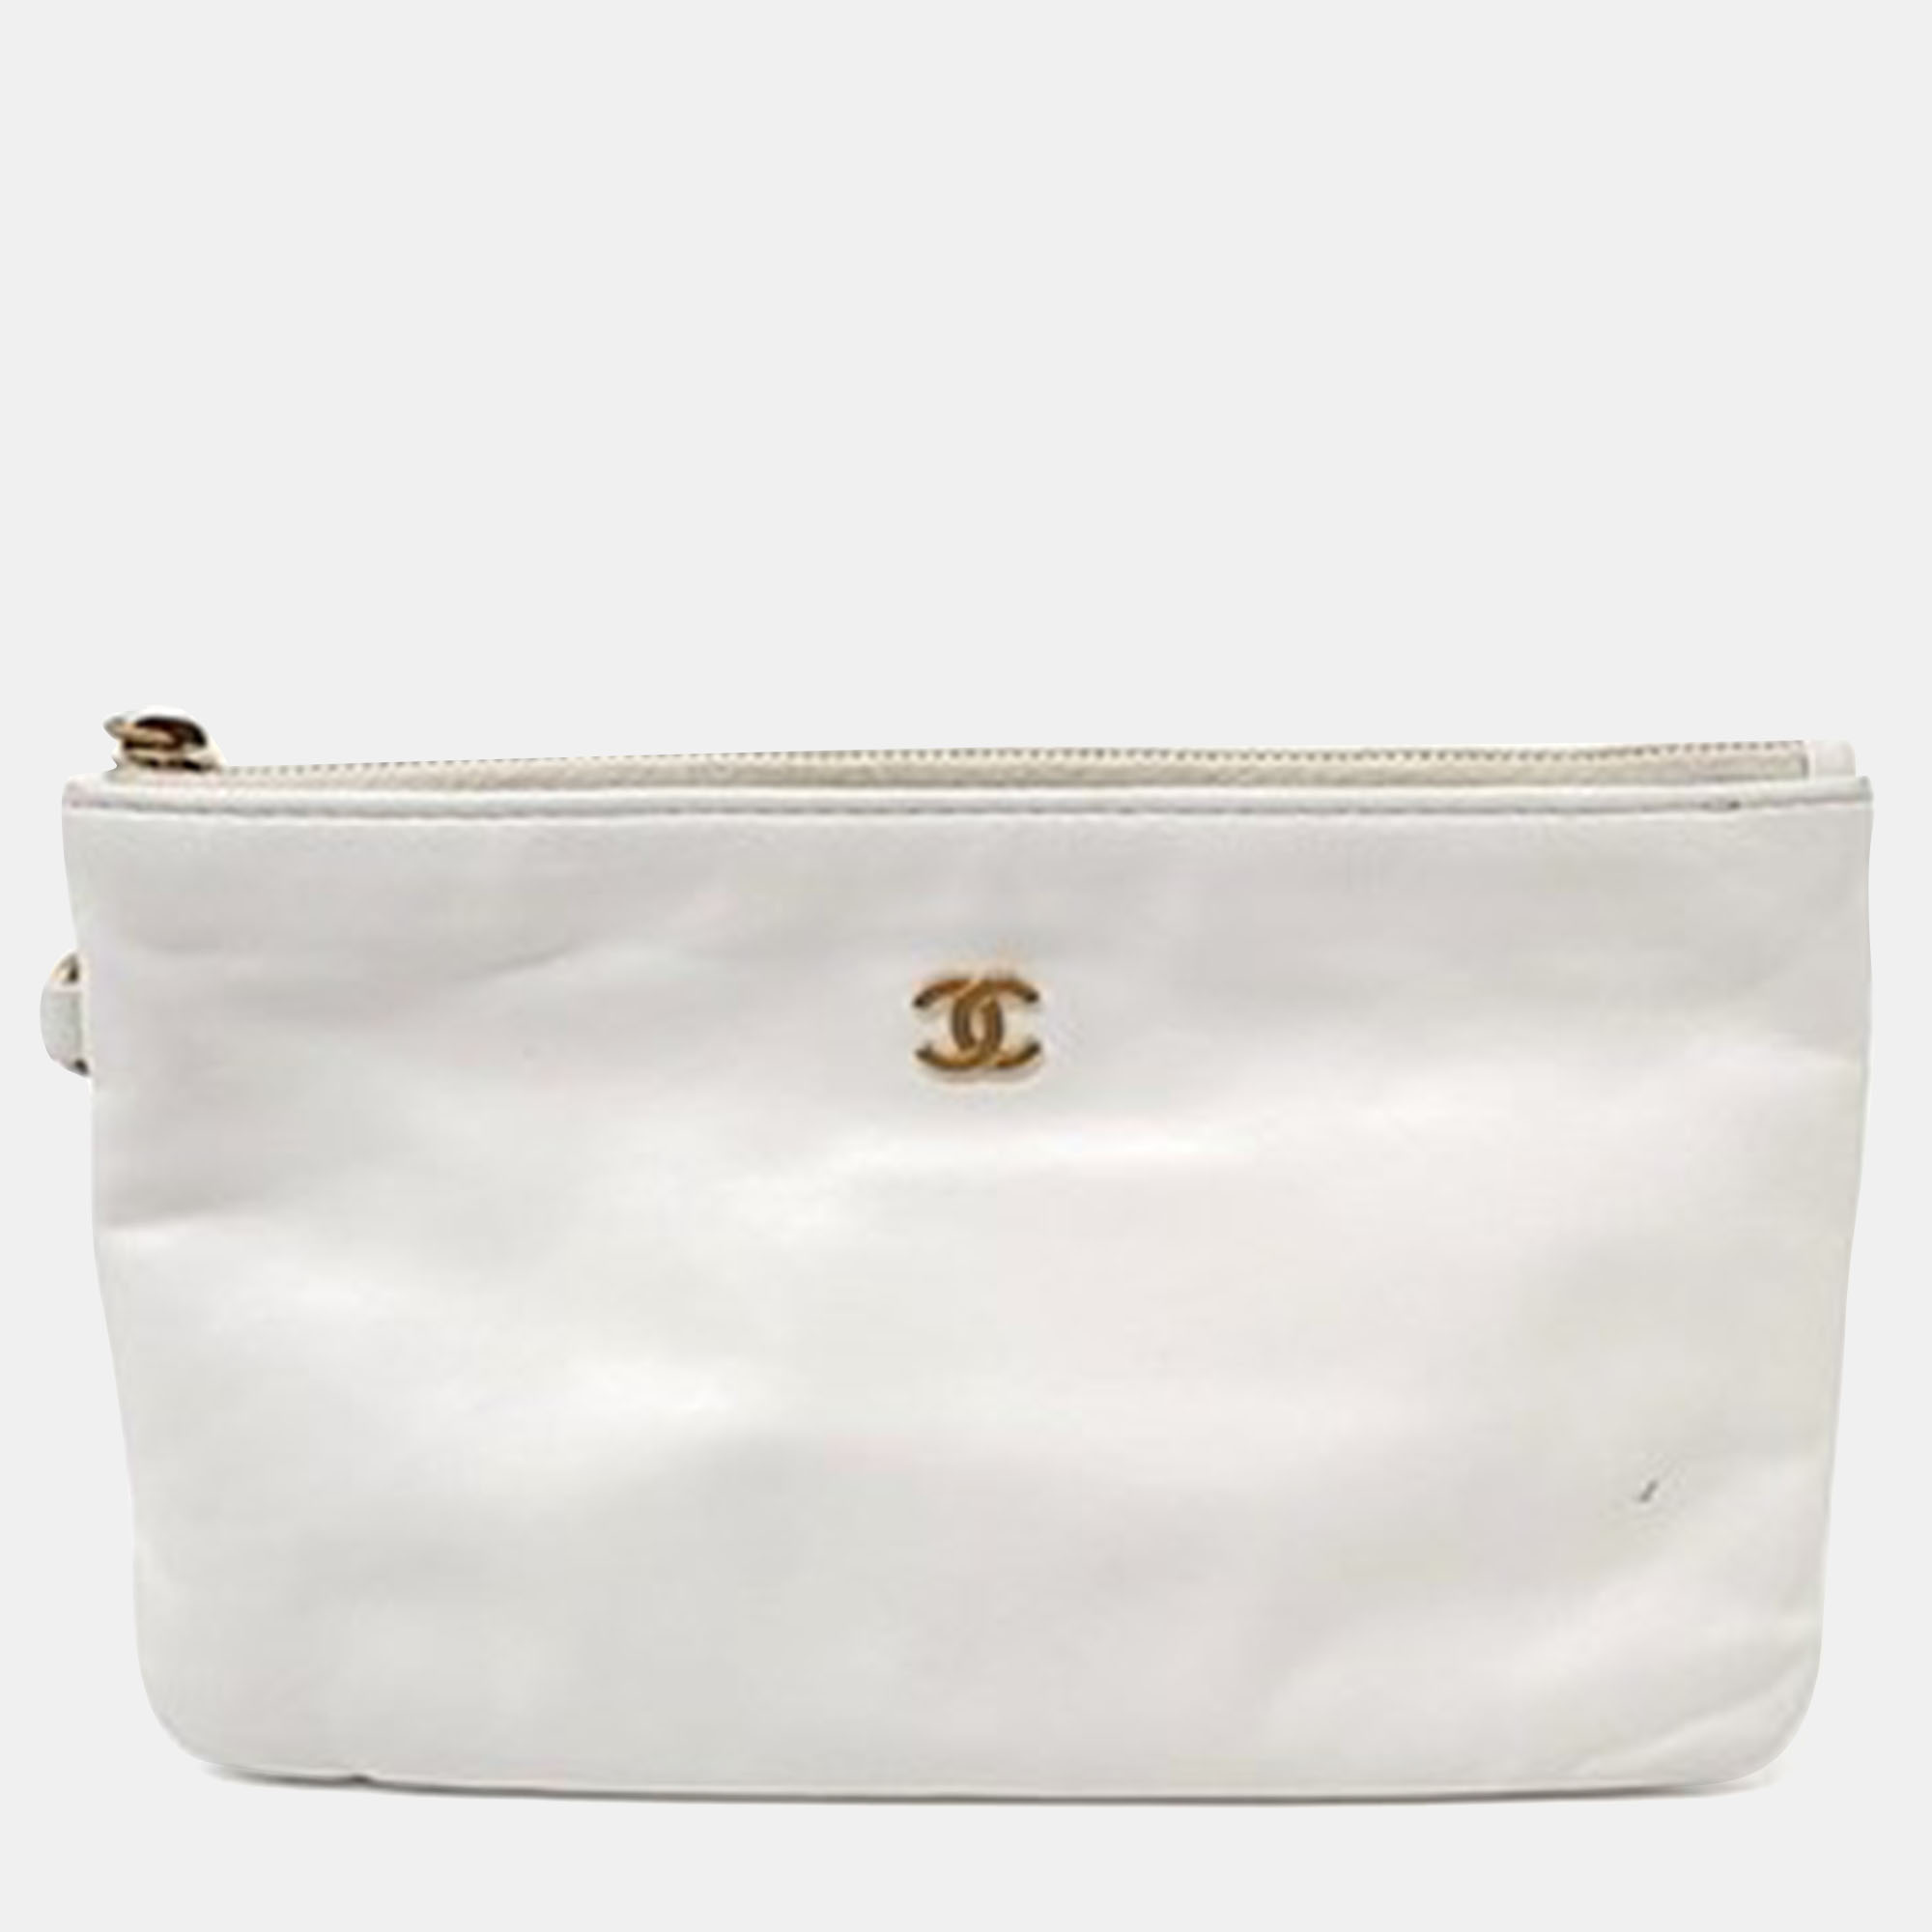 Chanel 22 White Leather Bag Small